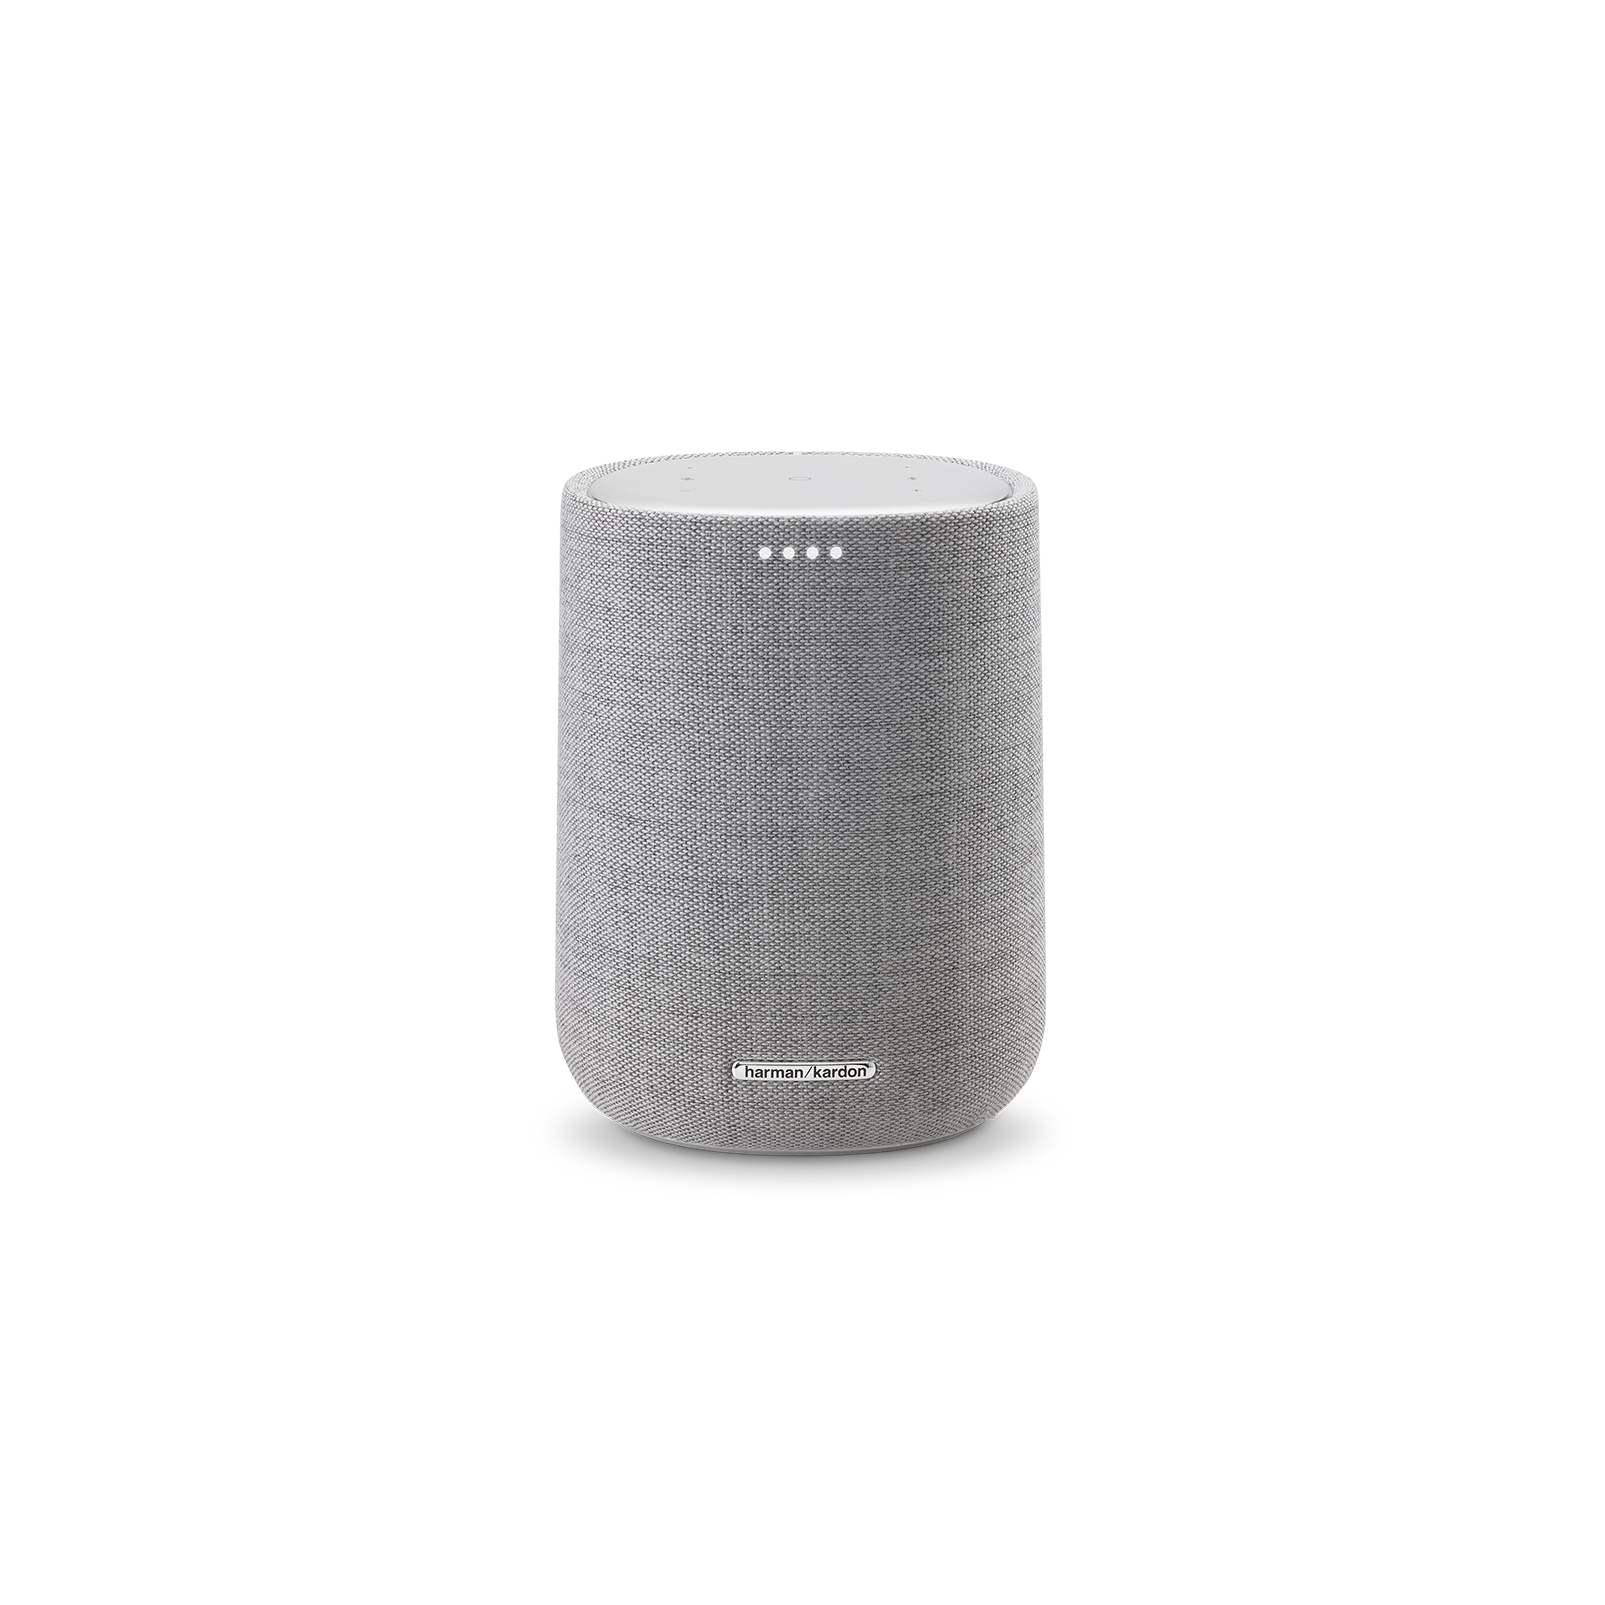 Harman Kardon Citation One MKII - Grey - All-in-one smart speaker with room-filling sound - Front